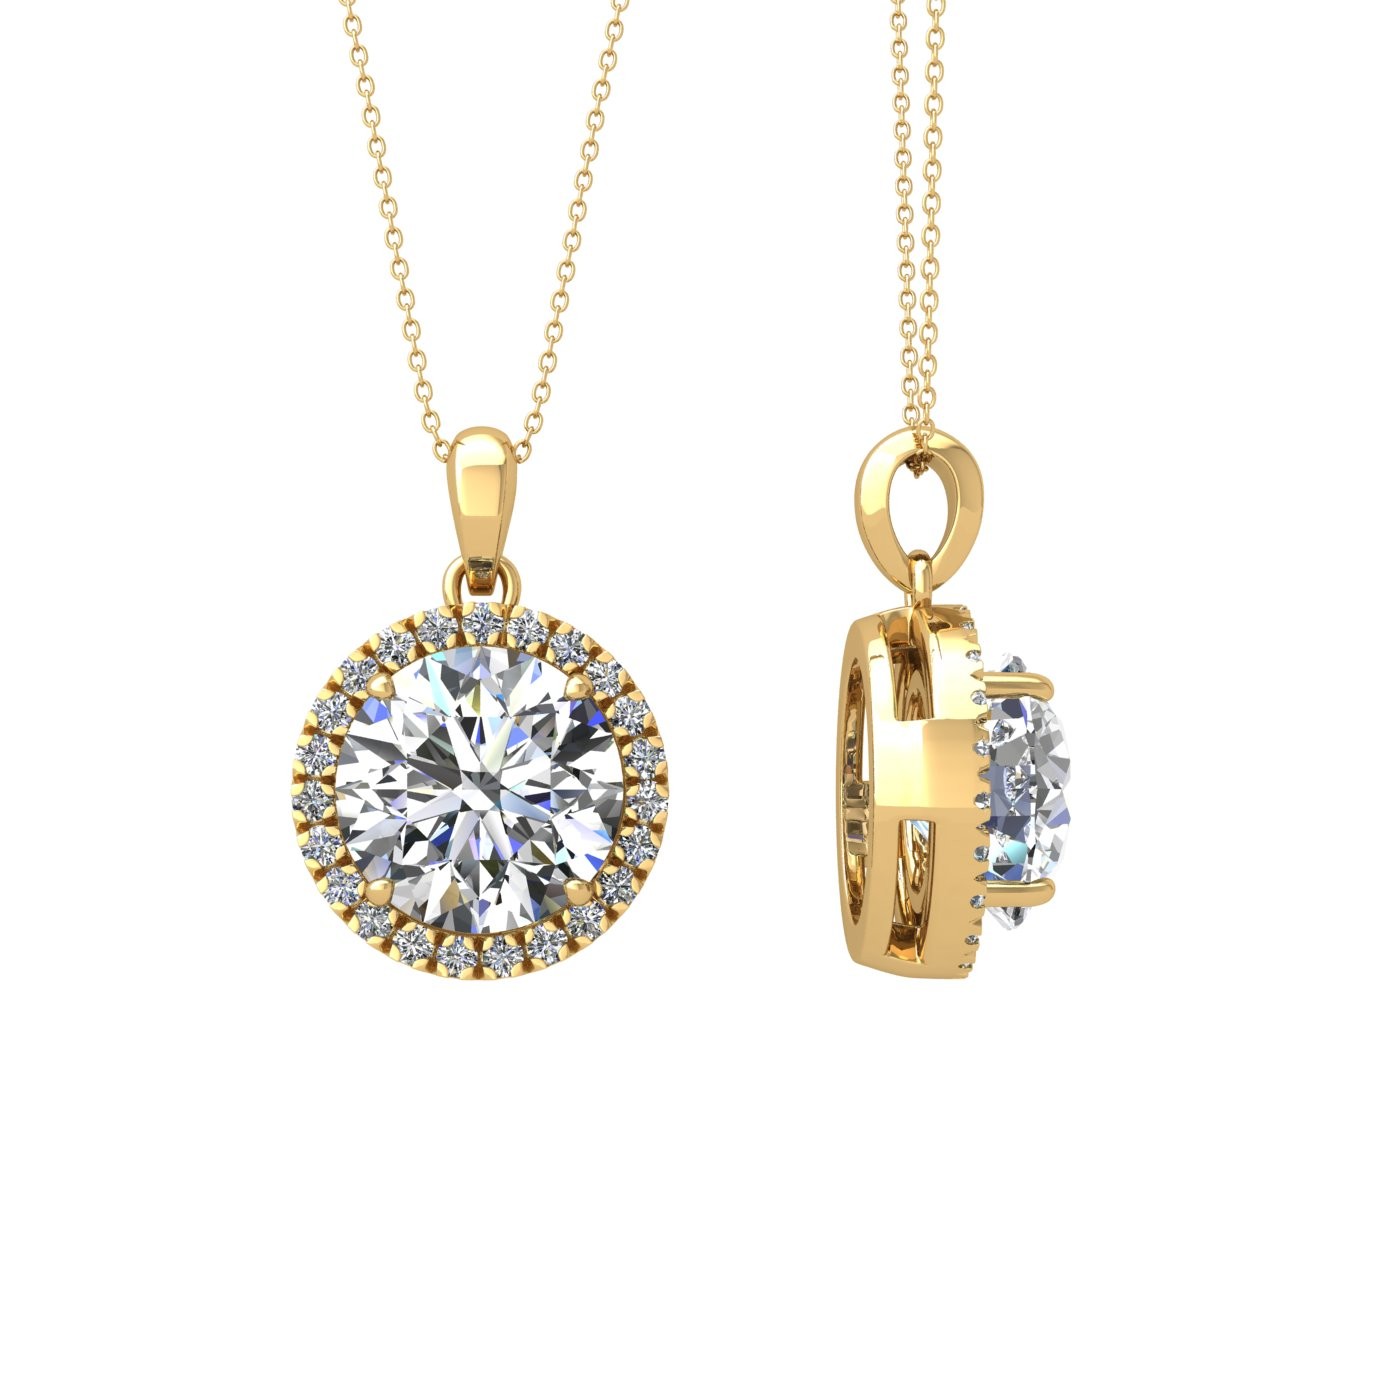 18k yellow gold  1,5 ct 4 prong round shape diamond pendant with diamond pavÉ set halo including chain seperate from the pendant Photos & images